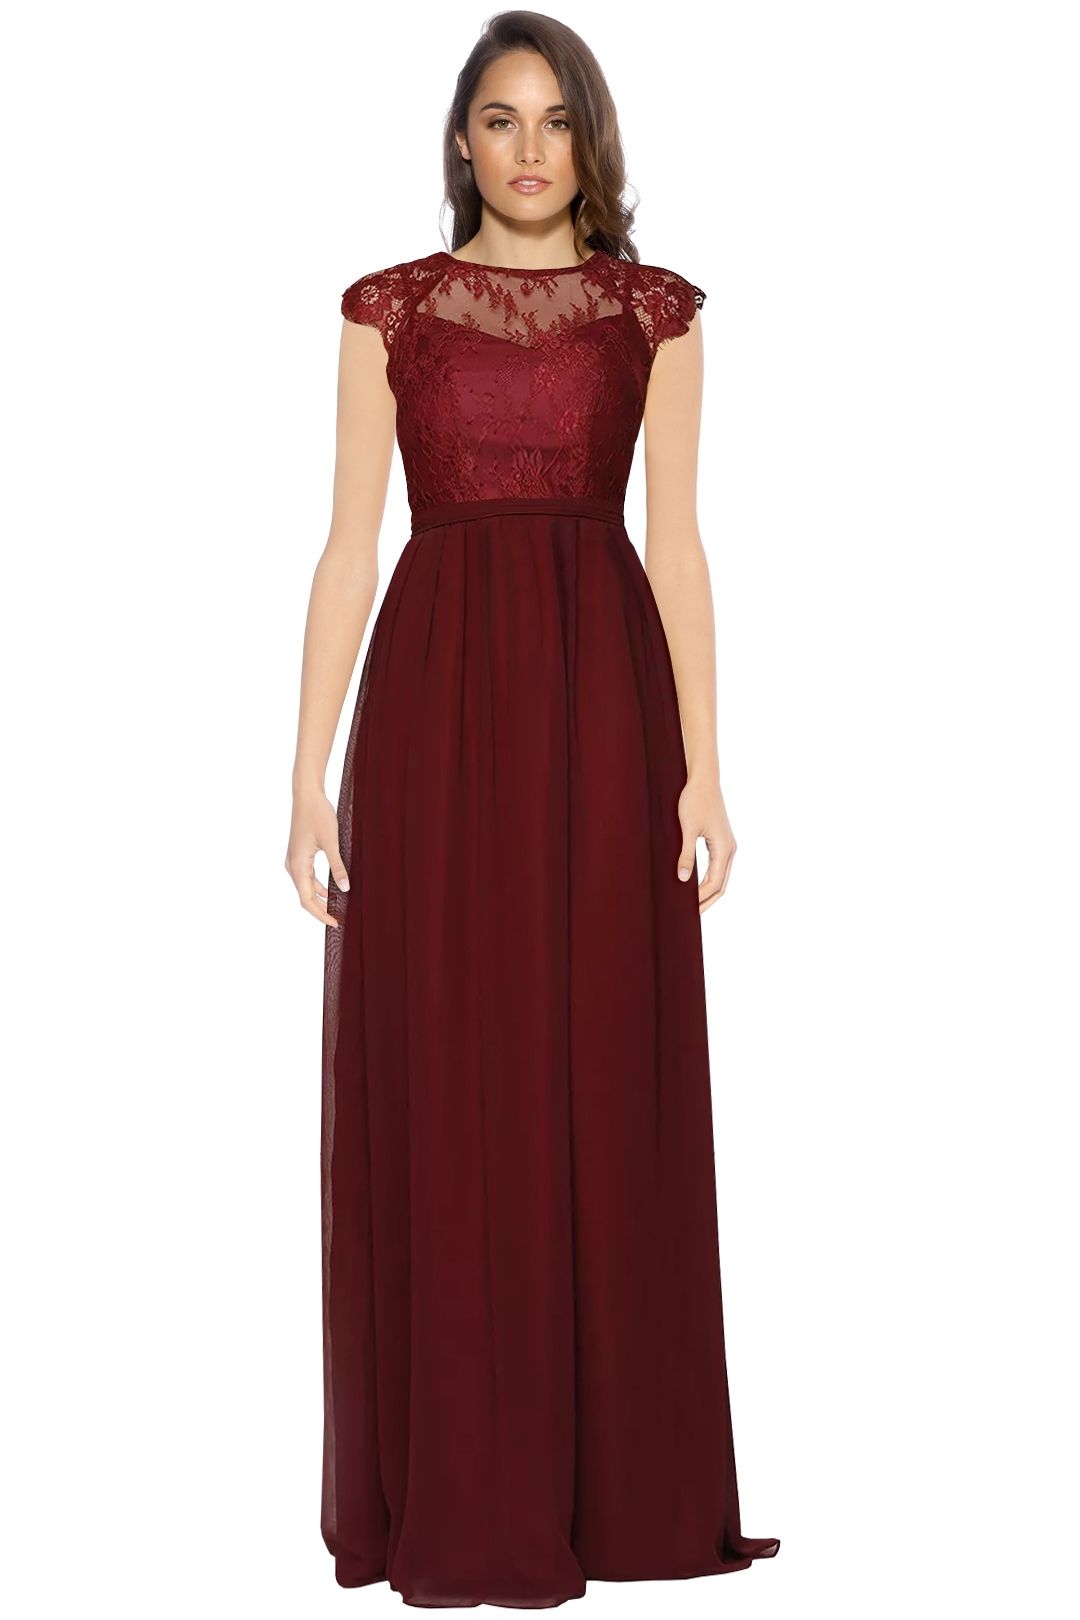 Camilla Merlot Gown by Tania Olsen for Hire | GlamCorner